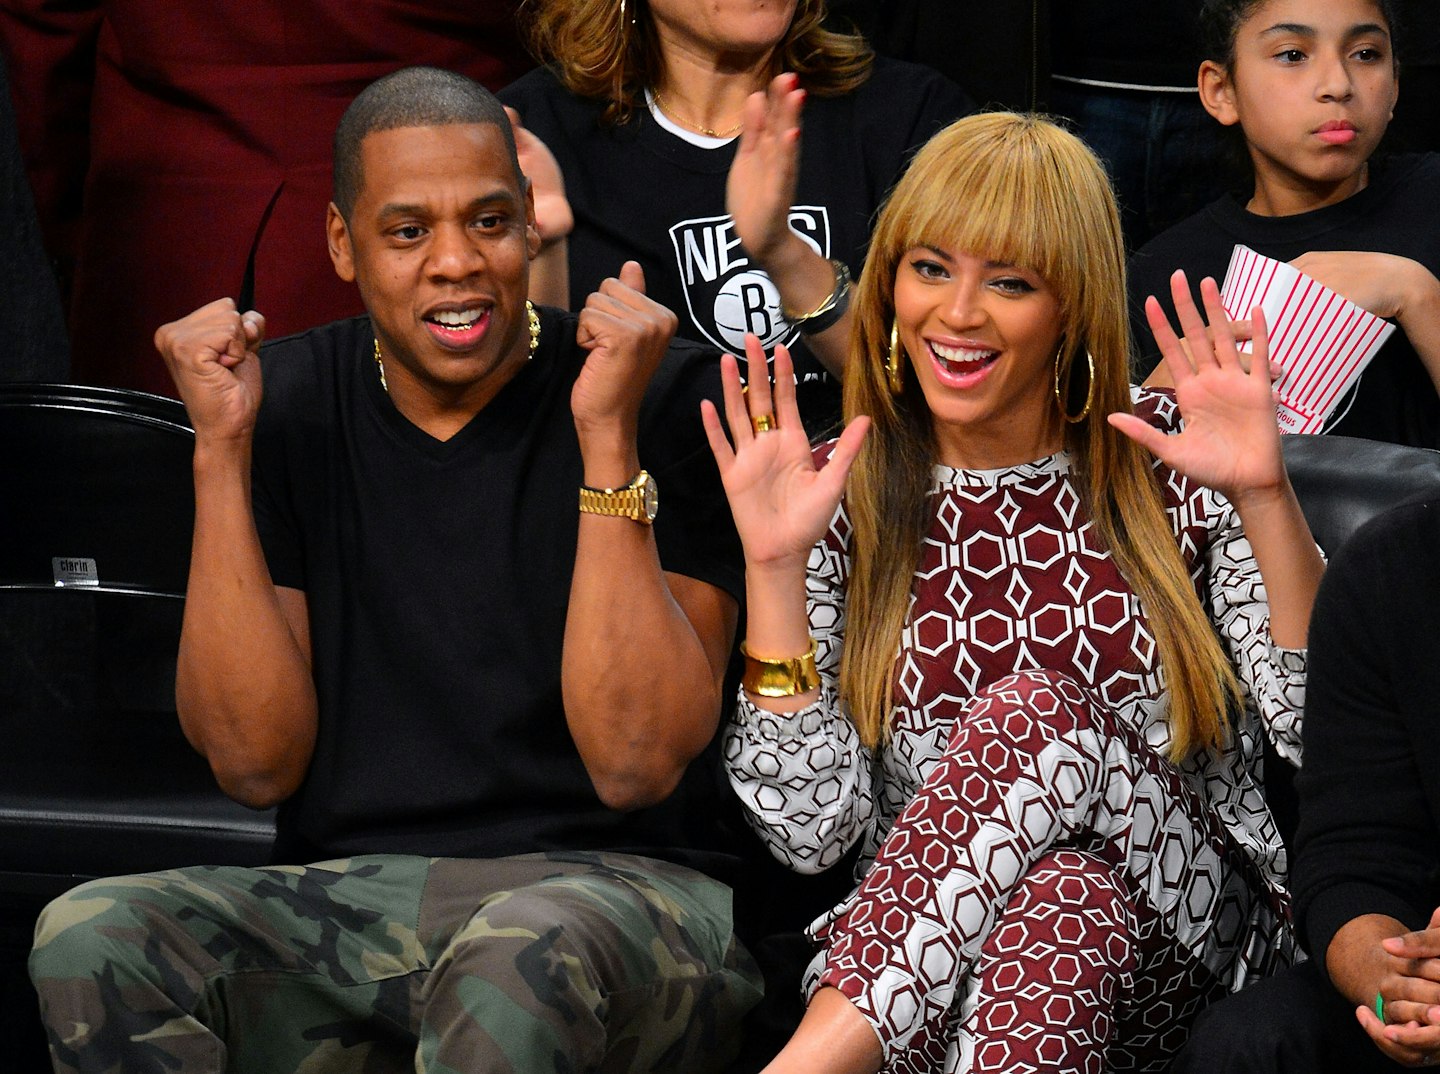 Jay-Z and Beyonce Knowles attend Toronto Raptors vs Brooklyn Nets game at Barclays Center on November 3, 2012 in Brooklyn, New York